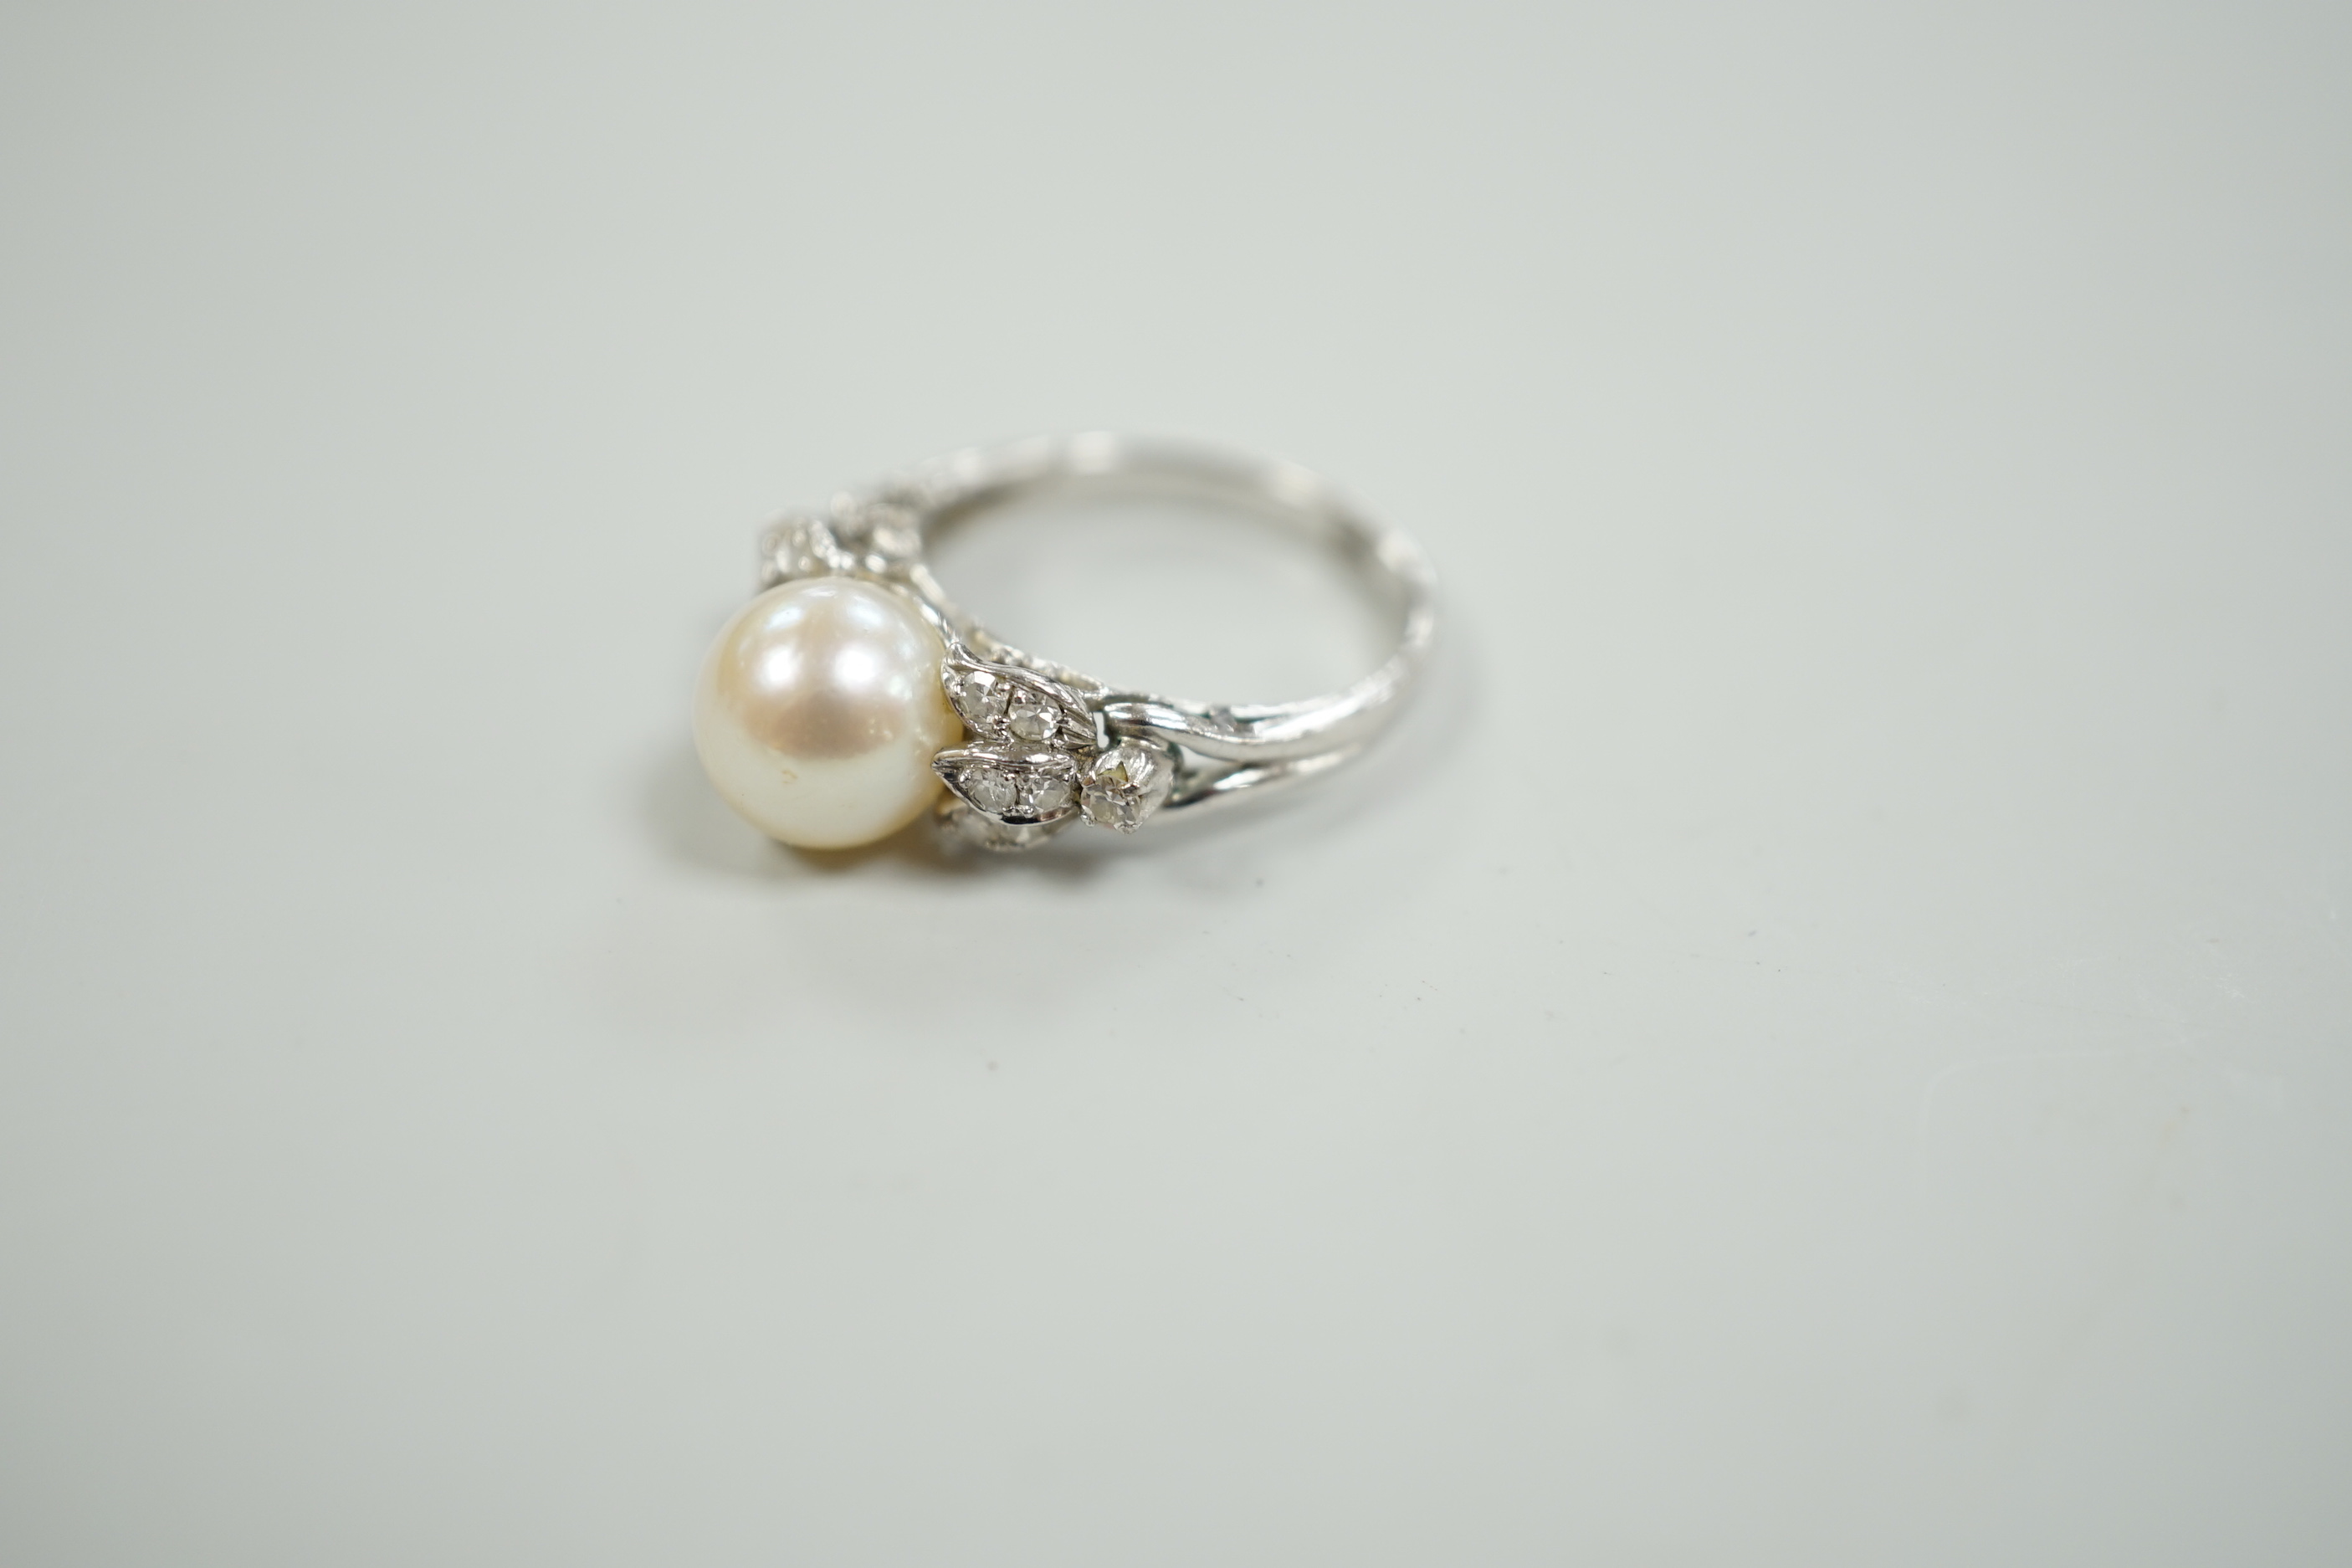 A 14k white metal and single stone cultured pearl set dress ring, with diamond cluster set shoulders, size J, gross weight 3.4 grams.